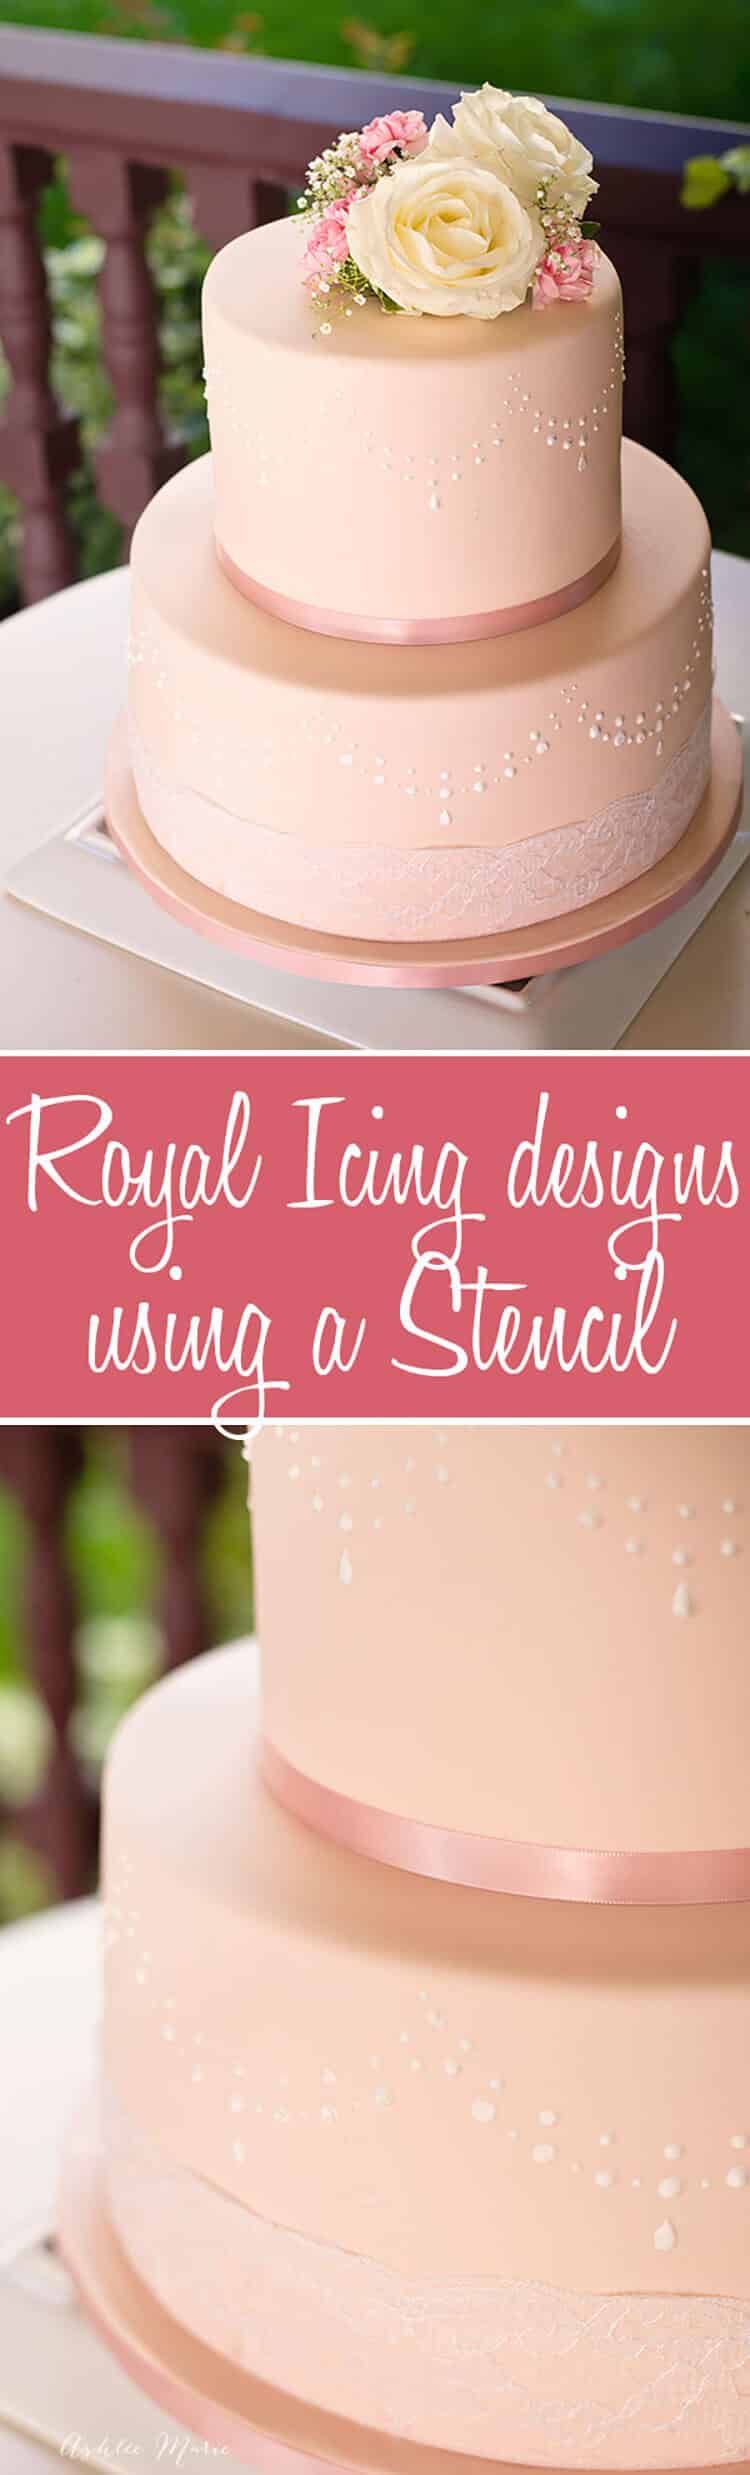 Decorating a fondant cake with fluffy and beautiful royal icing is adorable, making it easy to get even, repetitive designs using stencils - full video tutorial with tips